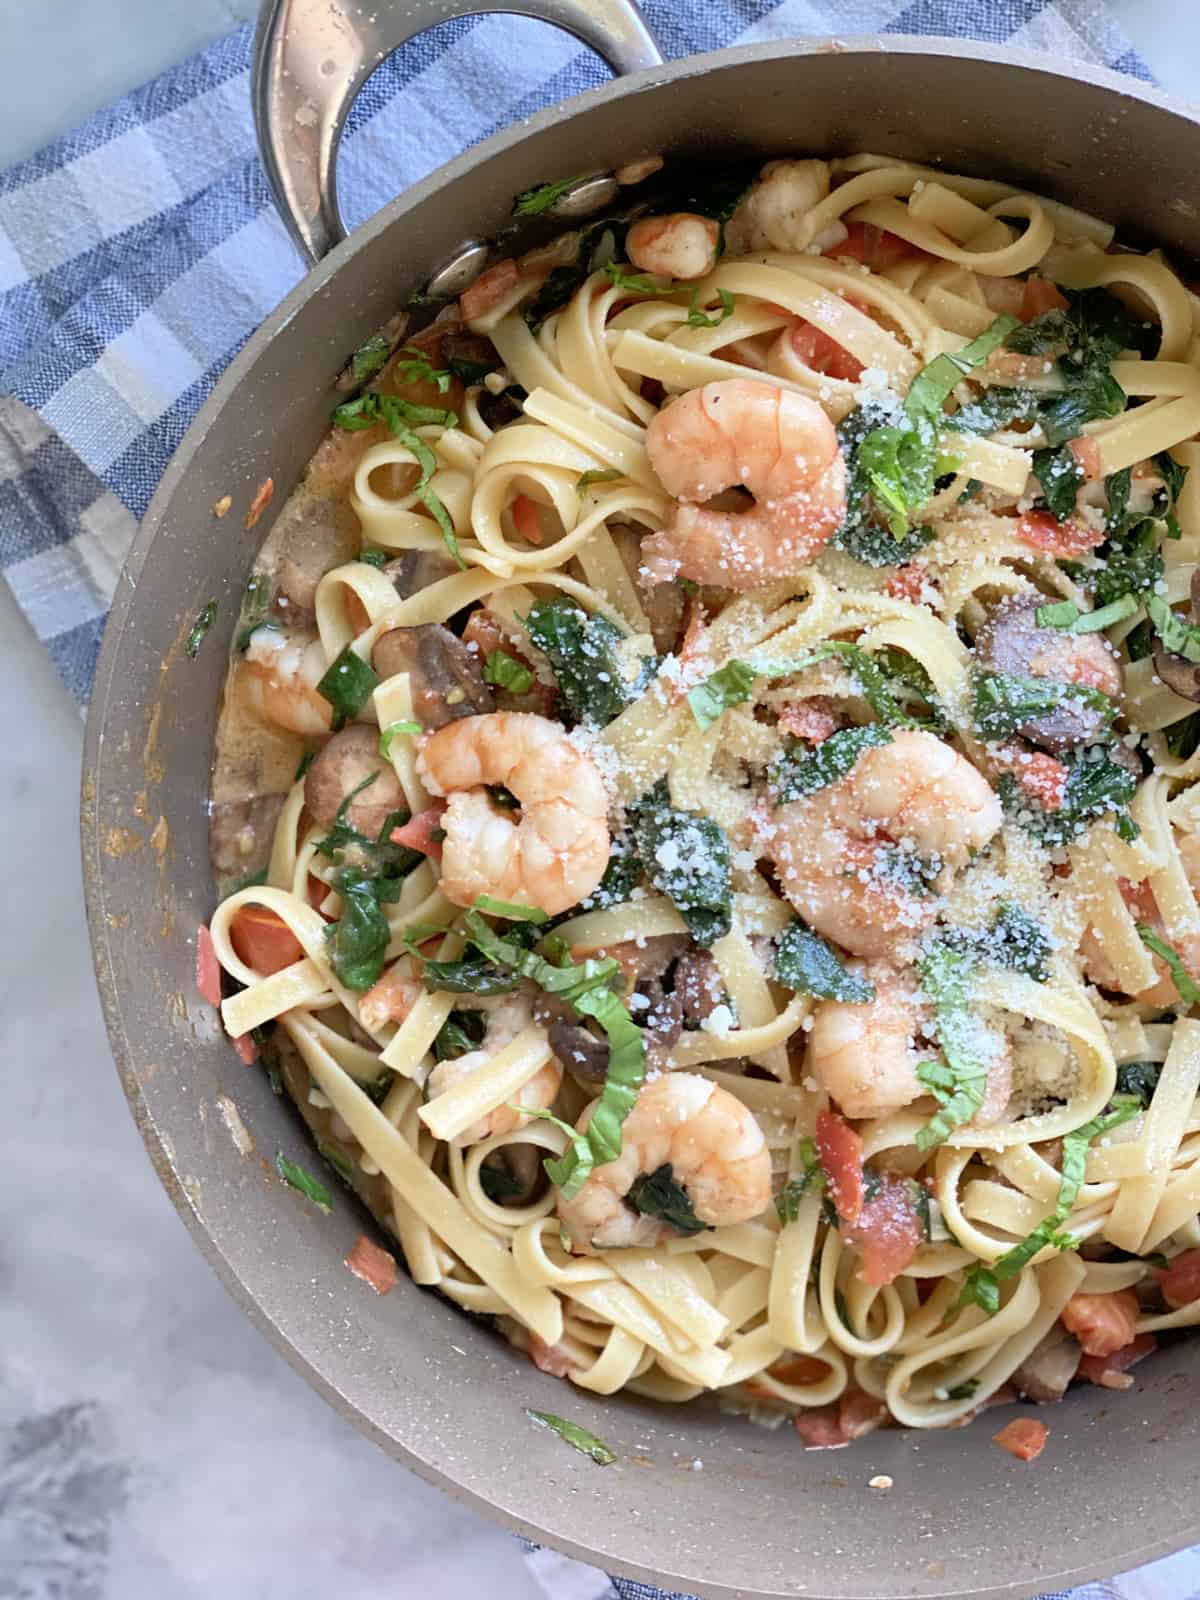 Top view of a pasta with shrimp, spinach, and cheese in a skillet.